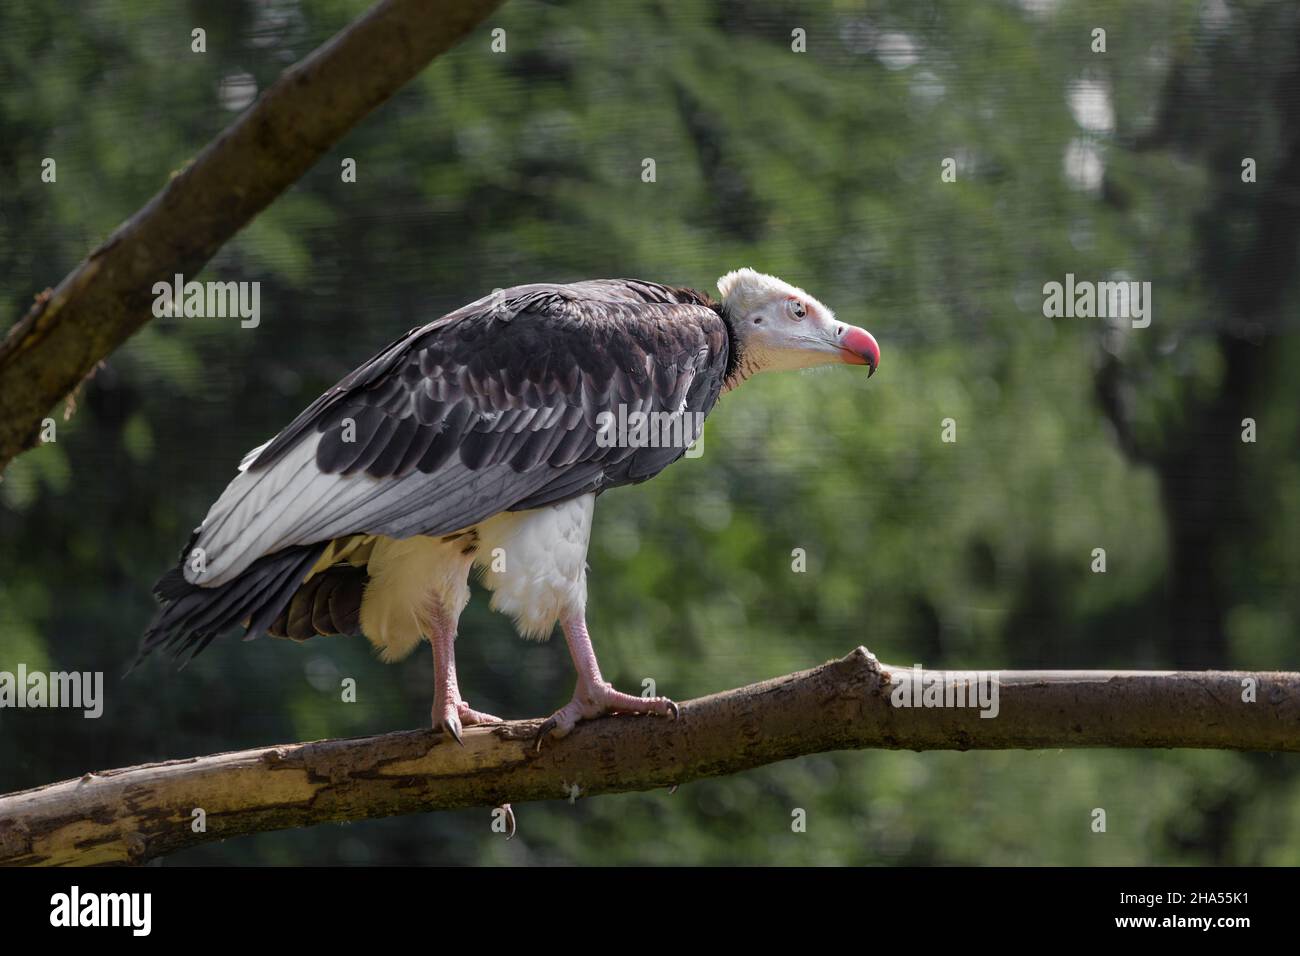 A light-headed vulture sits on a tree branch against a green background Stock Photo